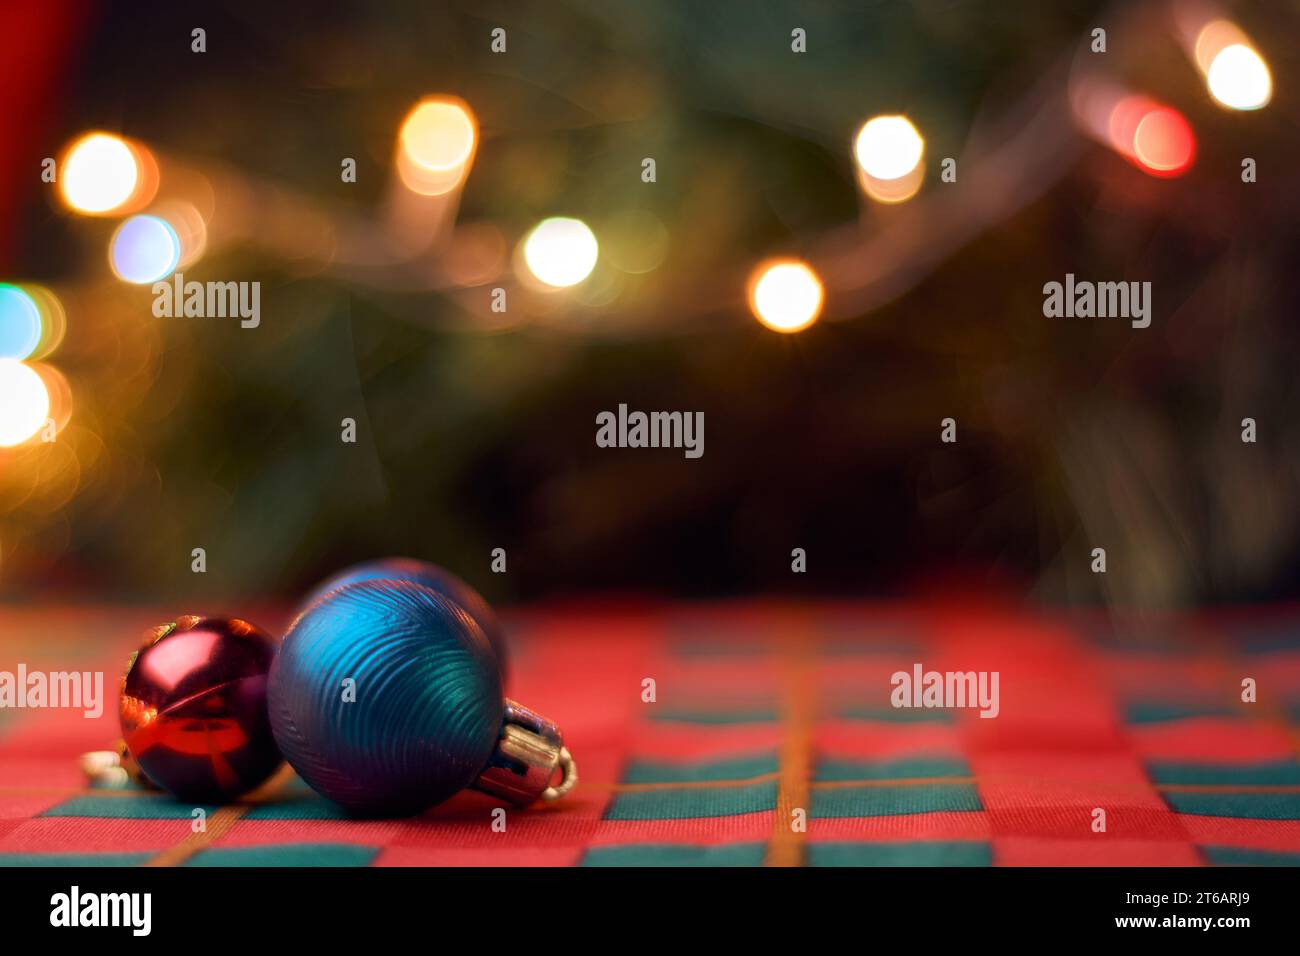 Horizontal Christmas background with Christmas balls on table with green and red tablecloth, blurred Christmas tree and lights. Copy space for text. Stock Photo